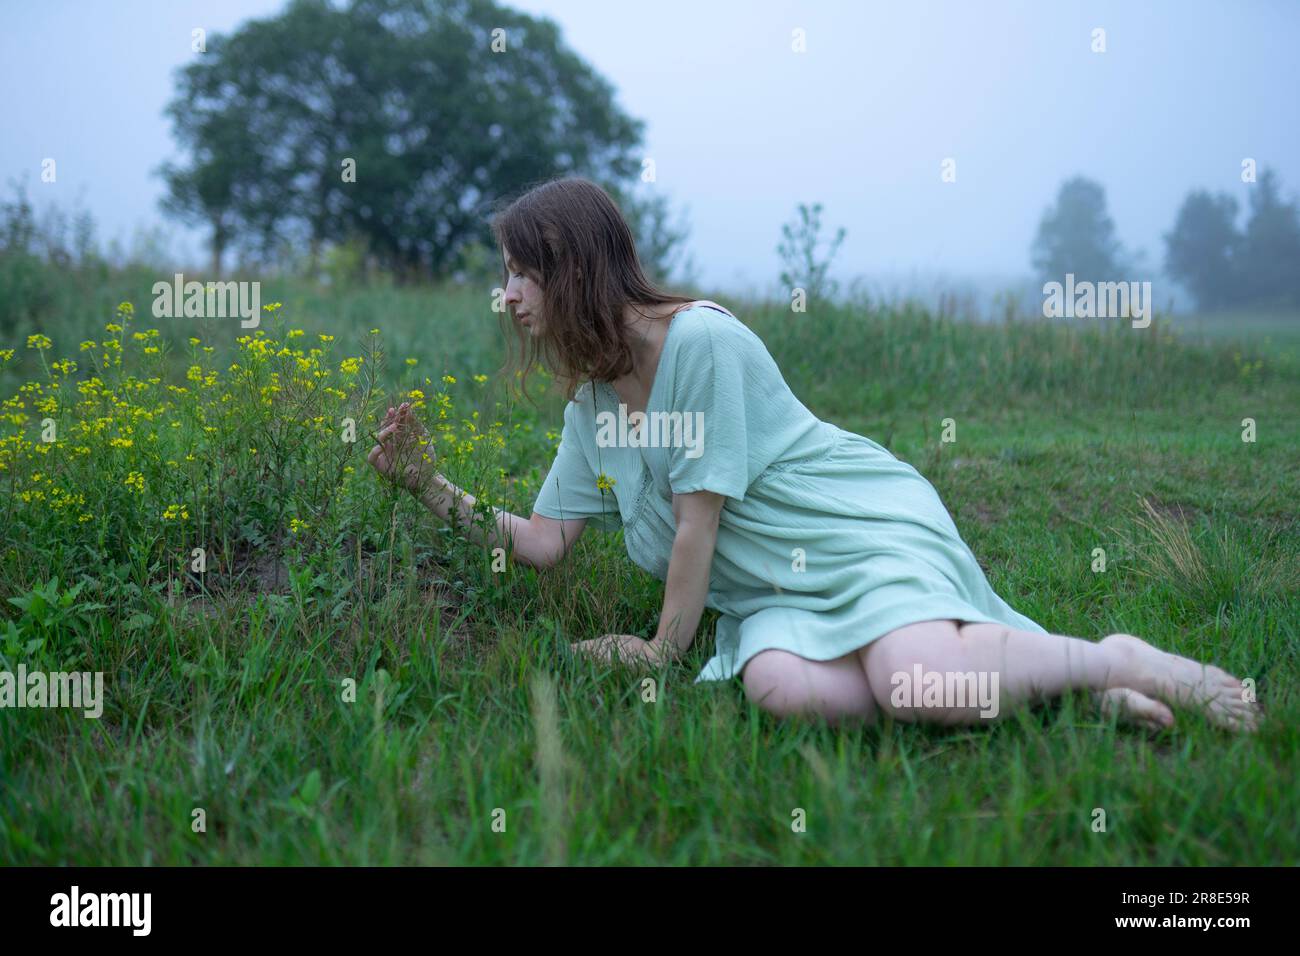 Woman looking at flowers in meadow on foggy day Stock Photo